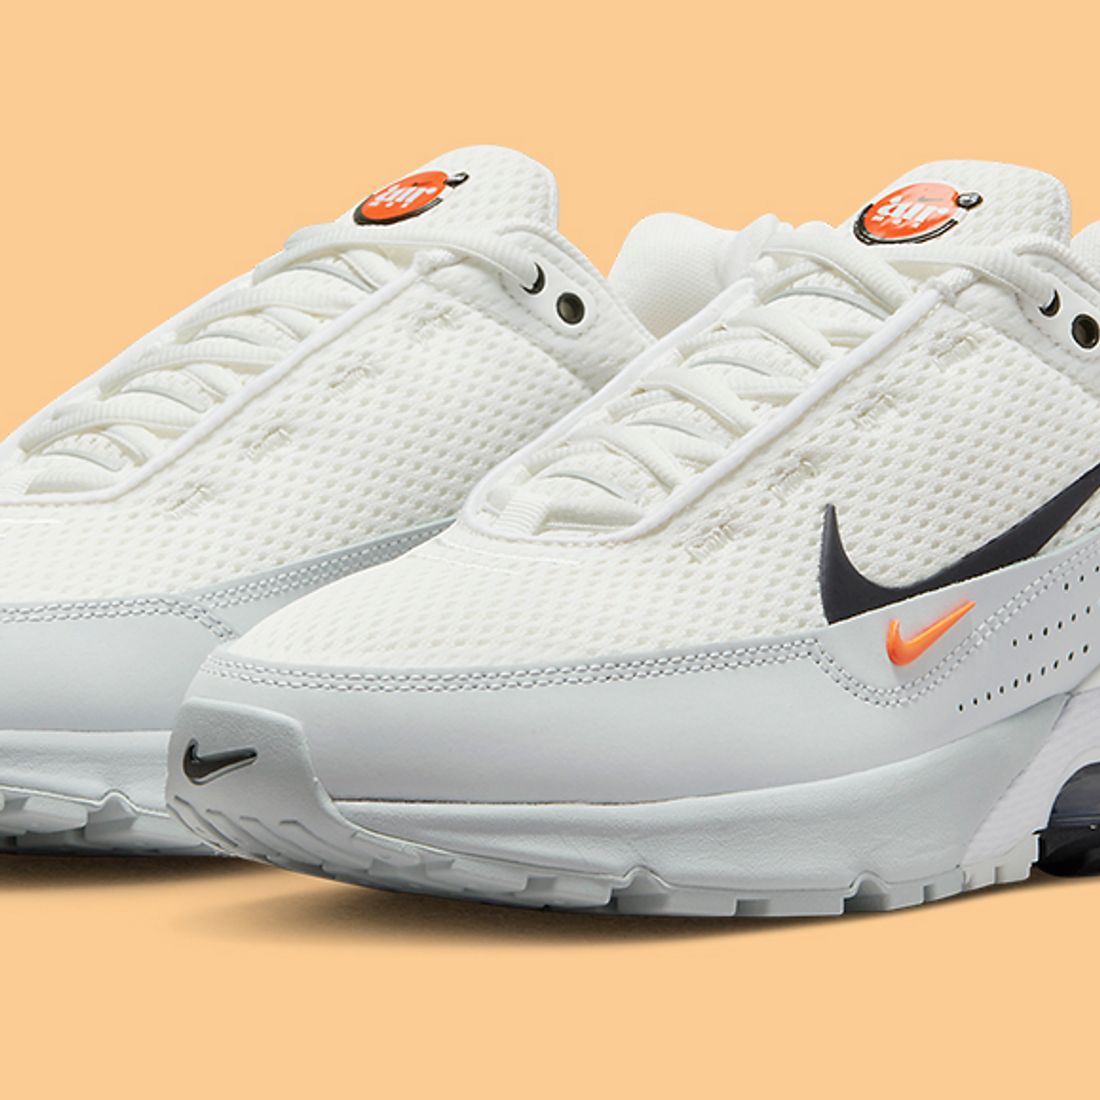 Nike Continue to Roll-Out Fresh Colourways for the Air Max Pulse Sneaker Freaker